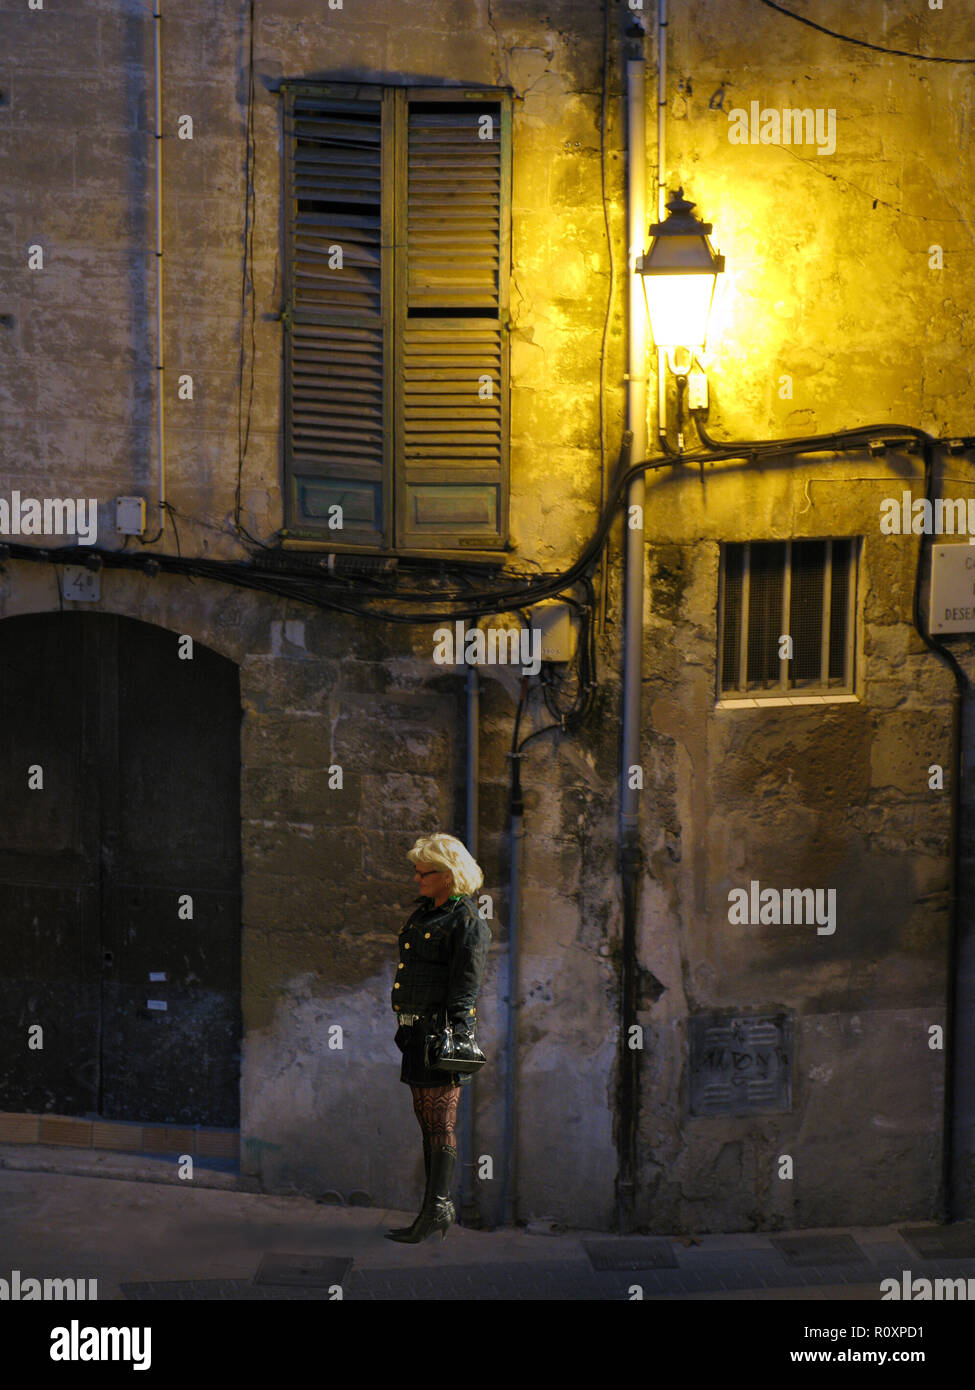 A blonde woman in boots, stockings and short skirt waits on a street corner beneath a street light and old shutters in the Avenidas District of Palma, Majorca, Spain Stock Photo